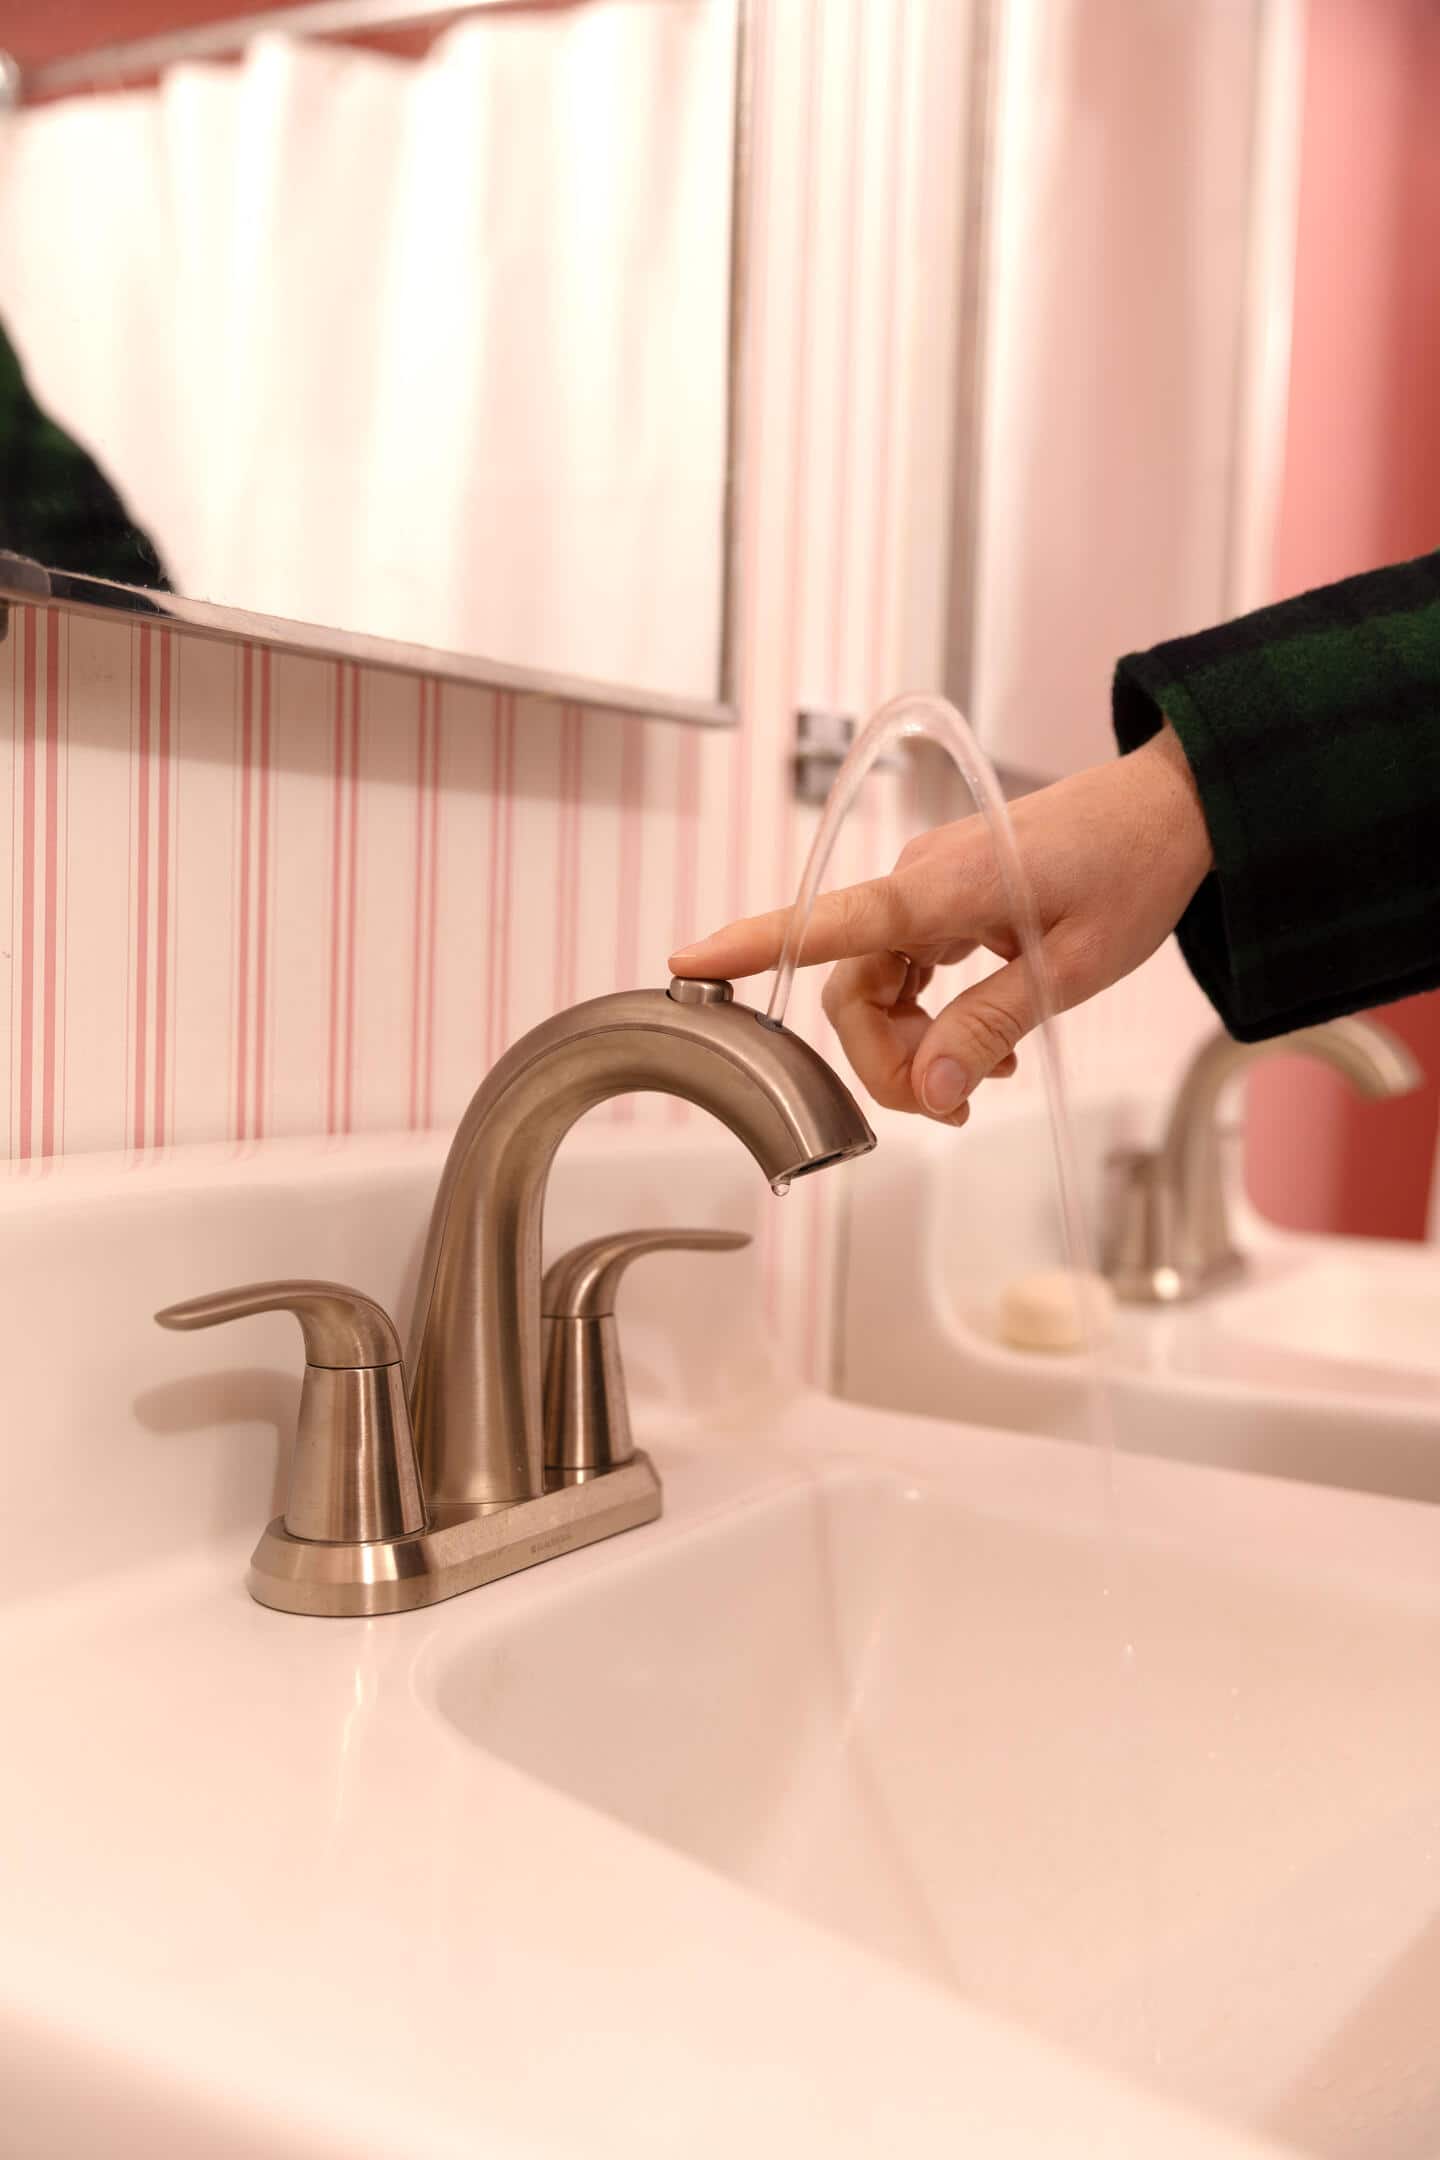 A person using a faucet.